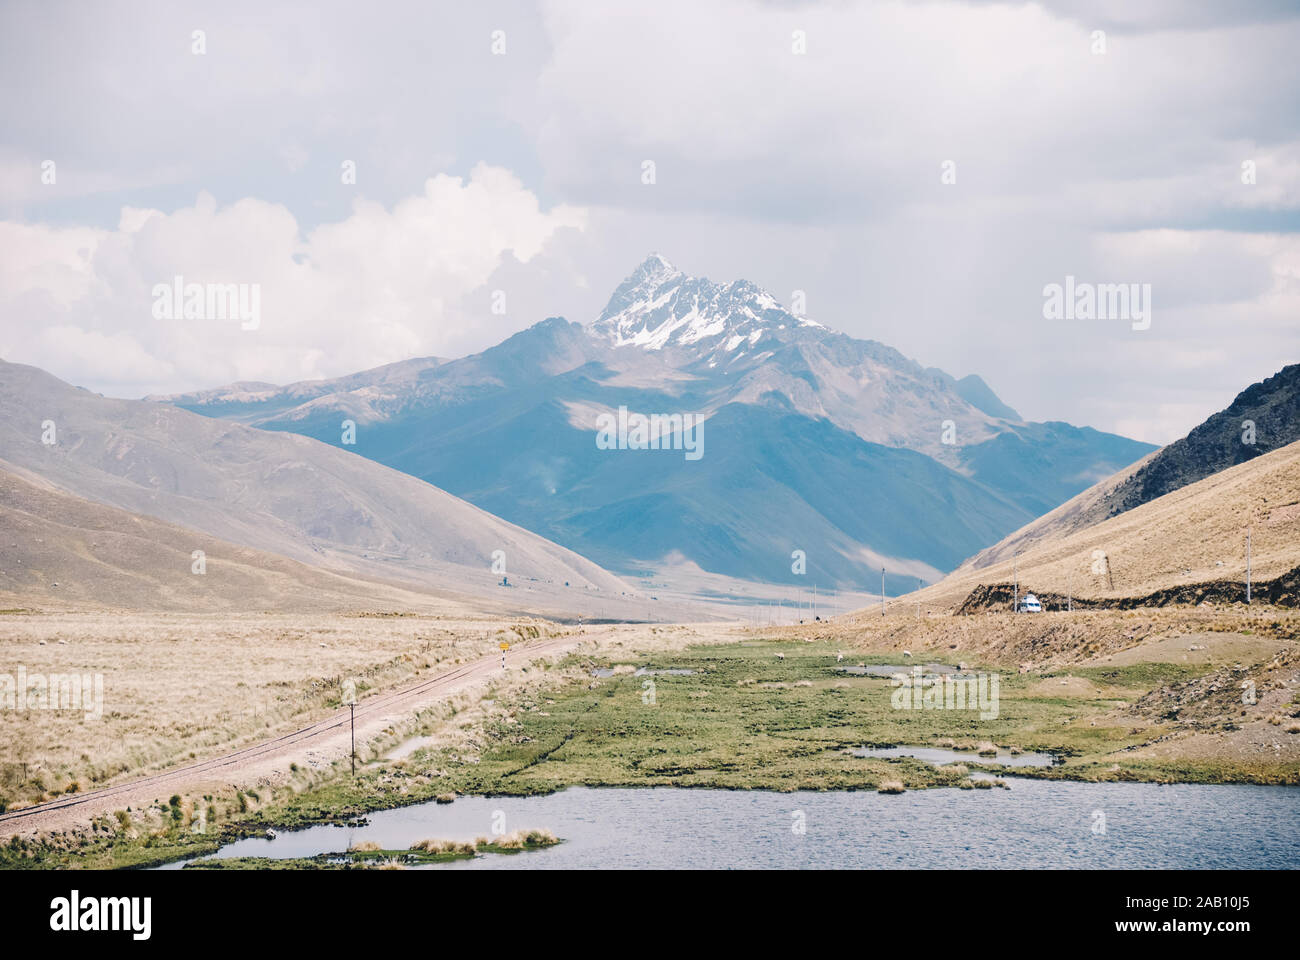 Snowy  mountain in the Andes range Stock Photo